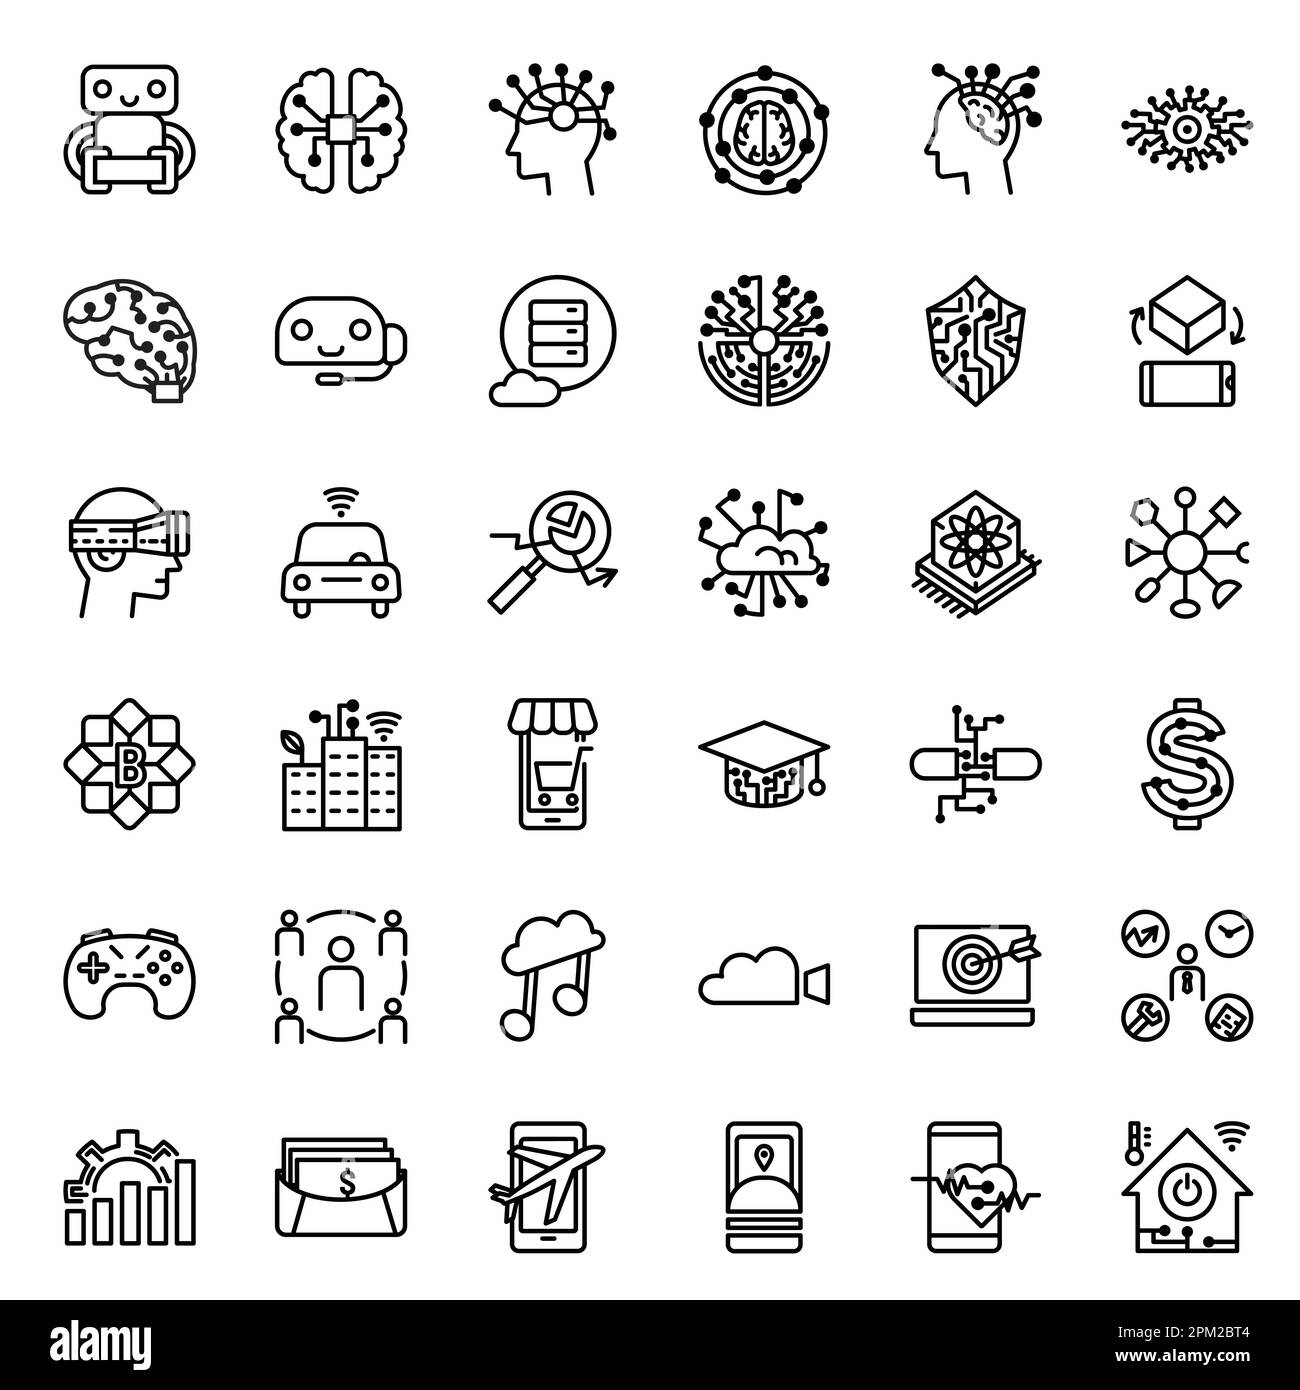 Innovative artificial intelligence and technology icon set in line style, designed to represent the latest advancements in AI and technology, vector i Stock Vector